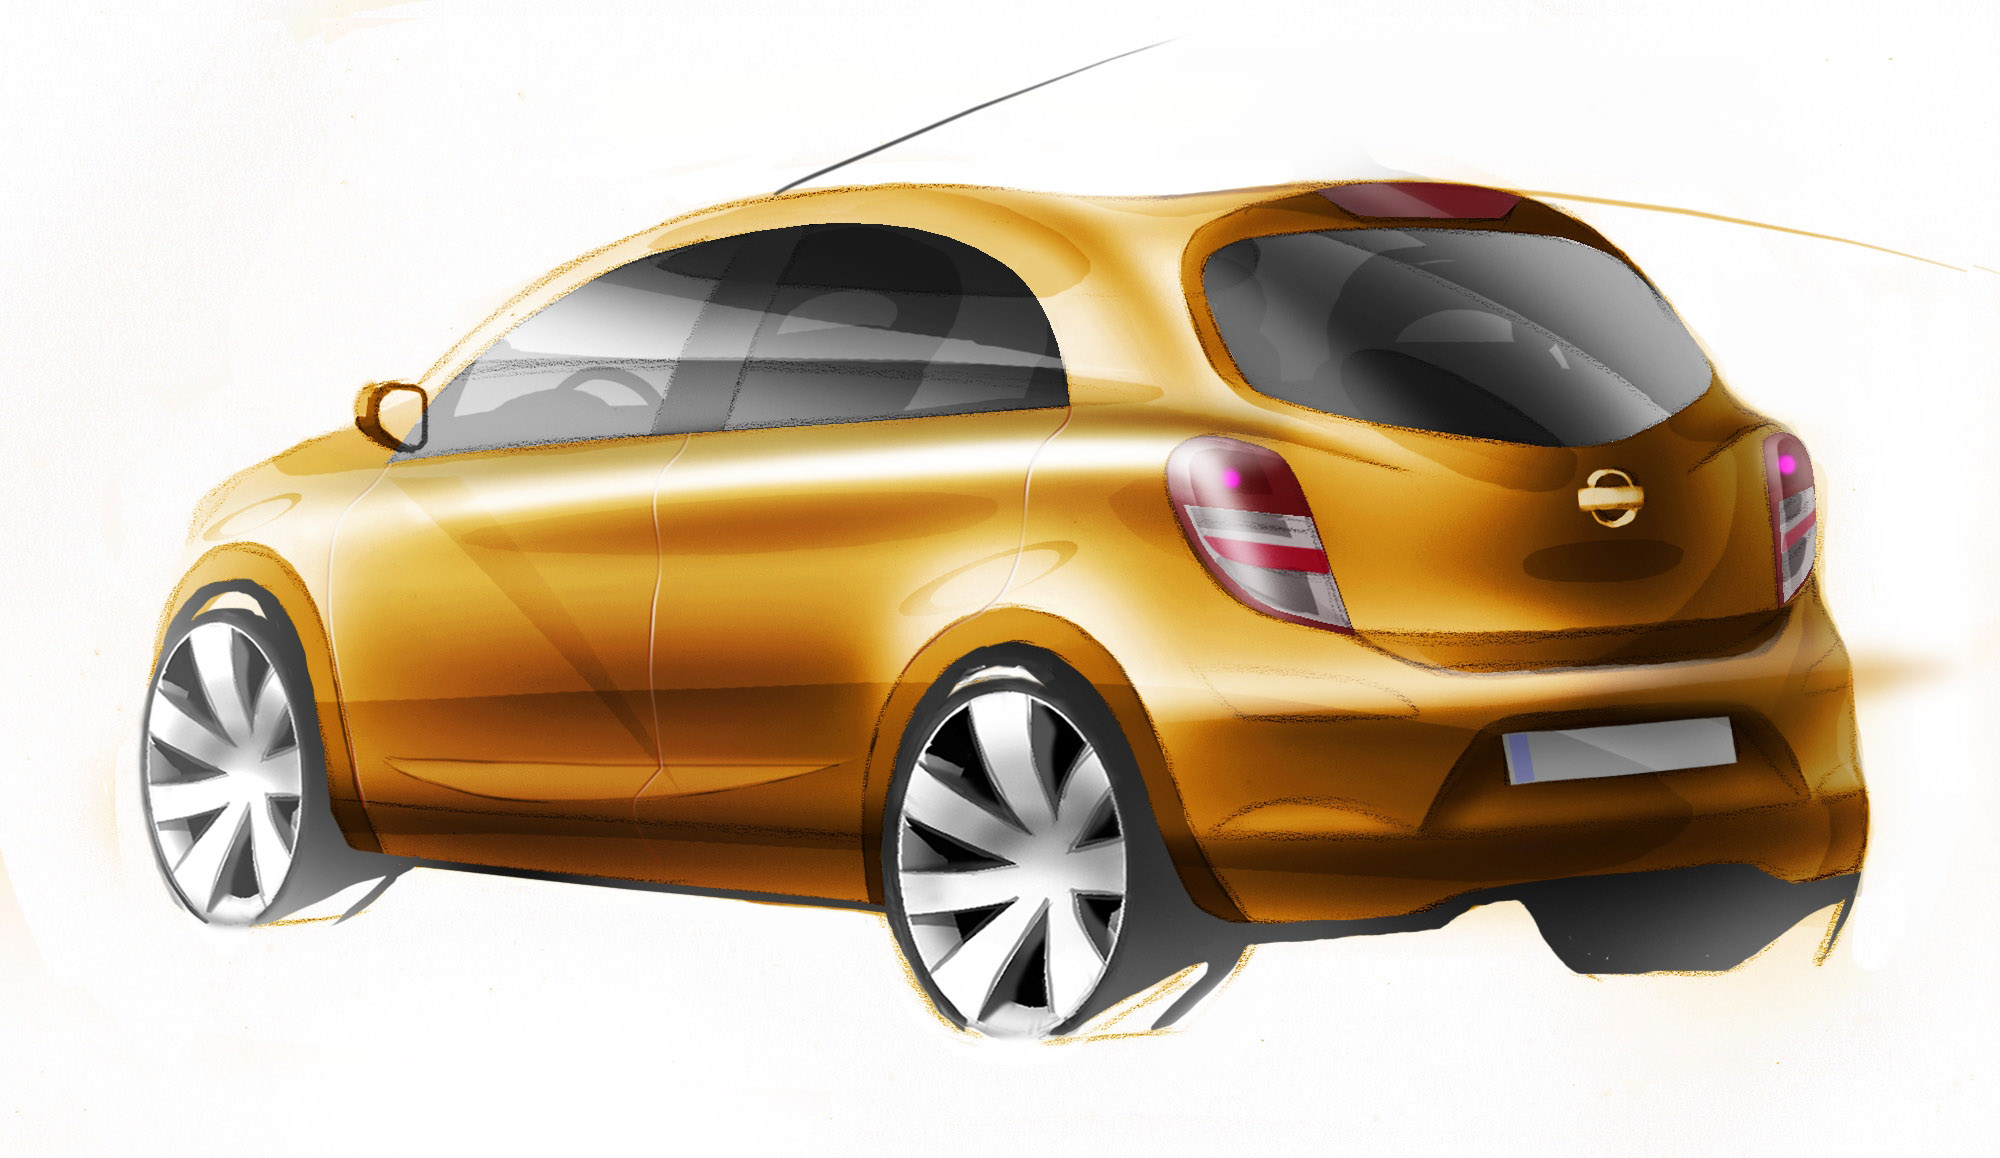 Nissan Global Compact Car sketches